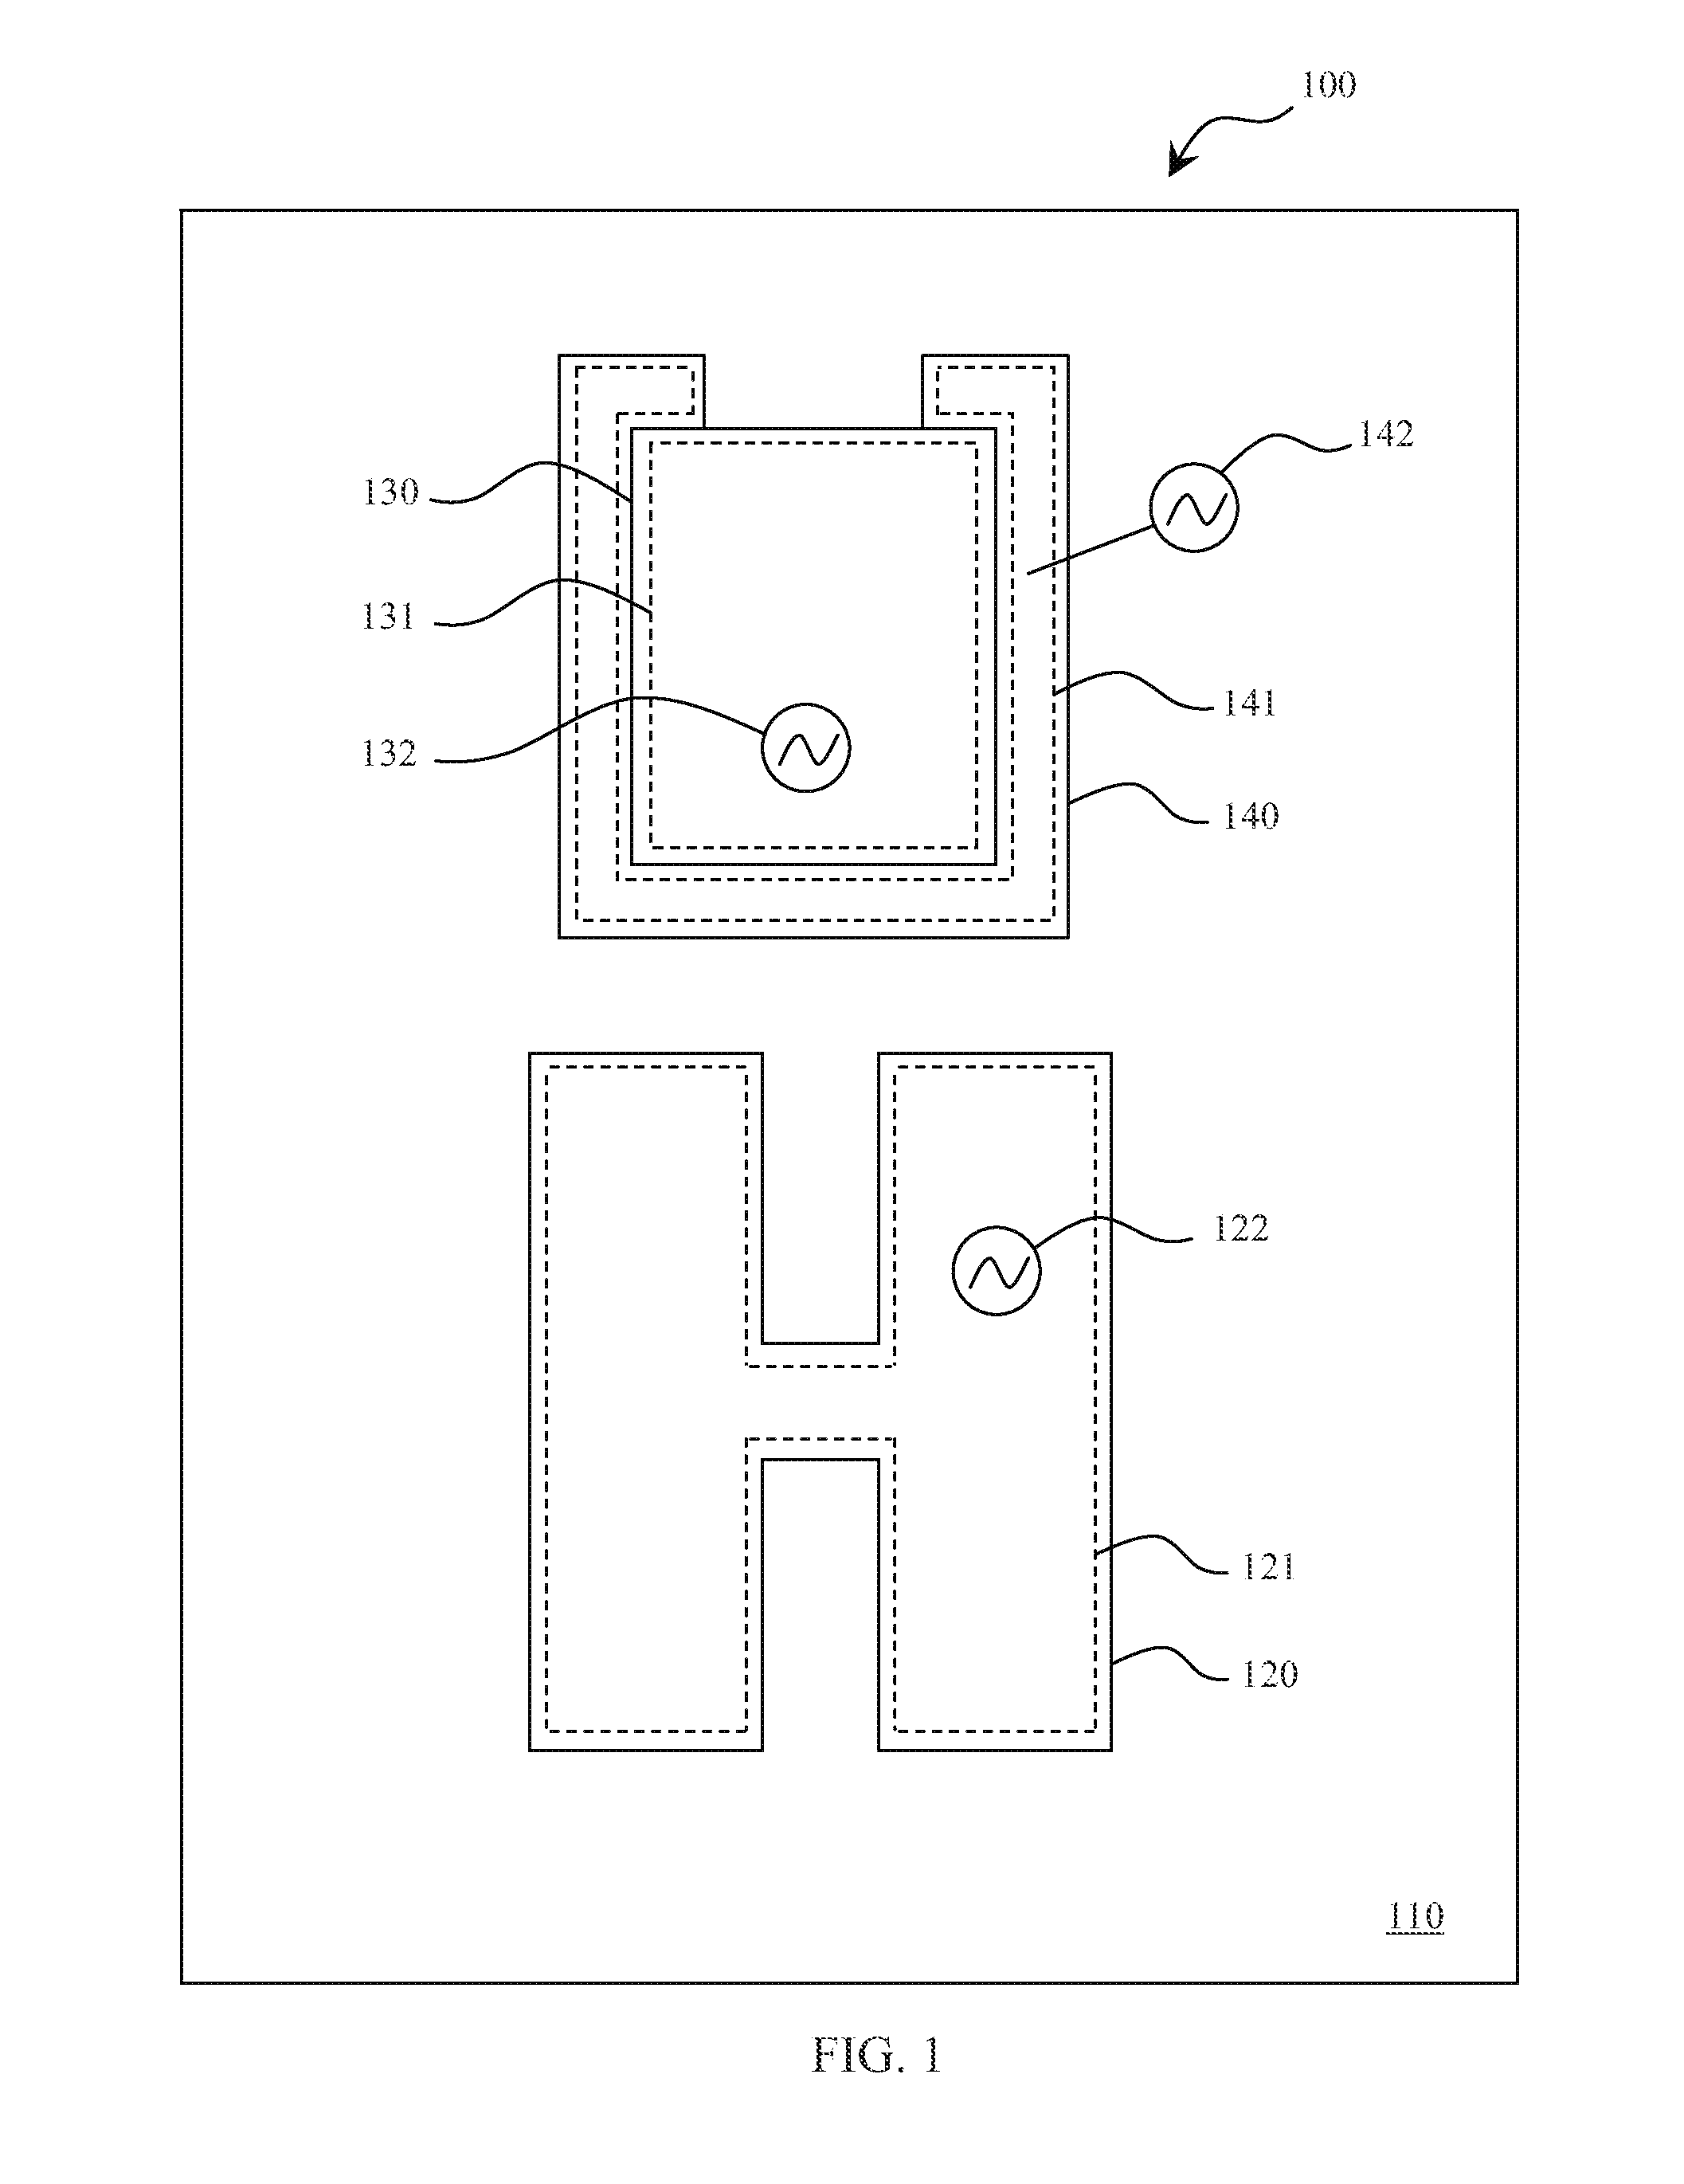 System, method, and computer program product for simulating epicardial electrophysiology procedures